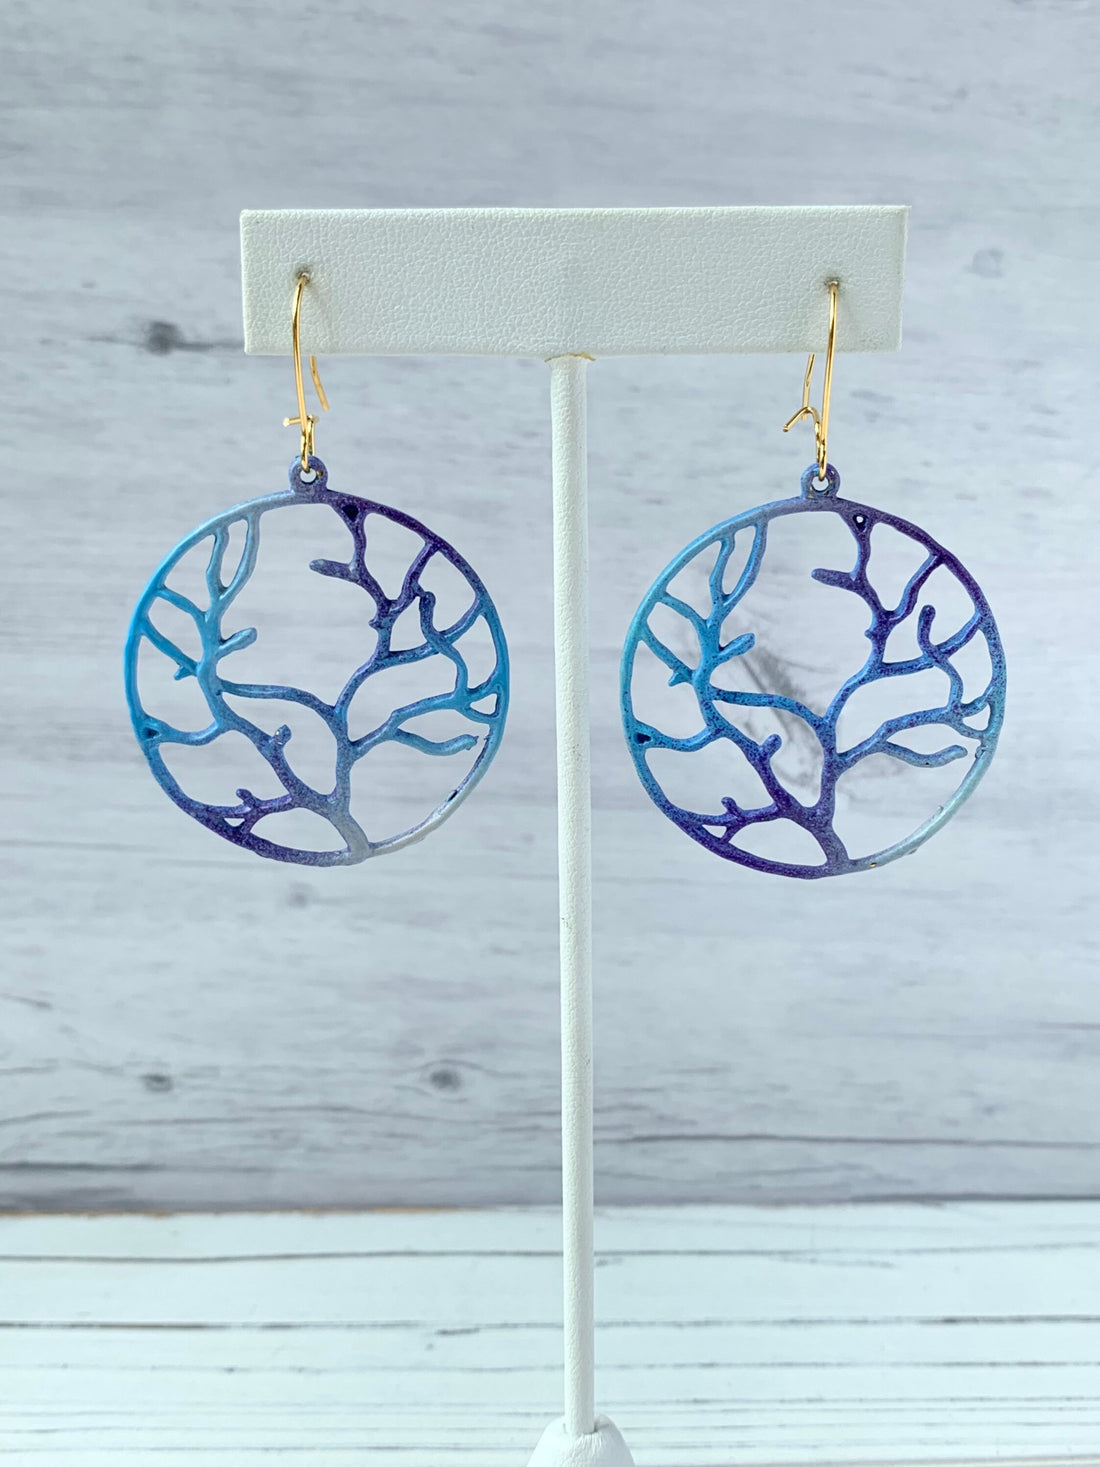 Lenora Dame Willow Tree Earrings in Cloudy Day